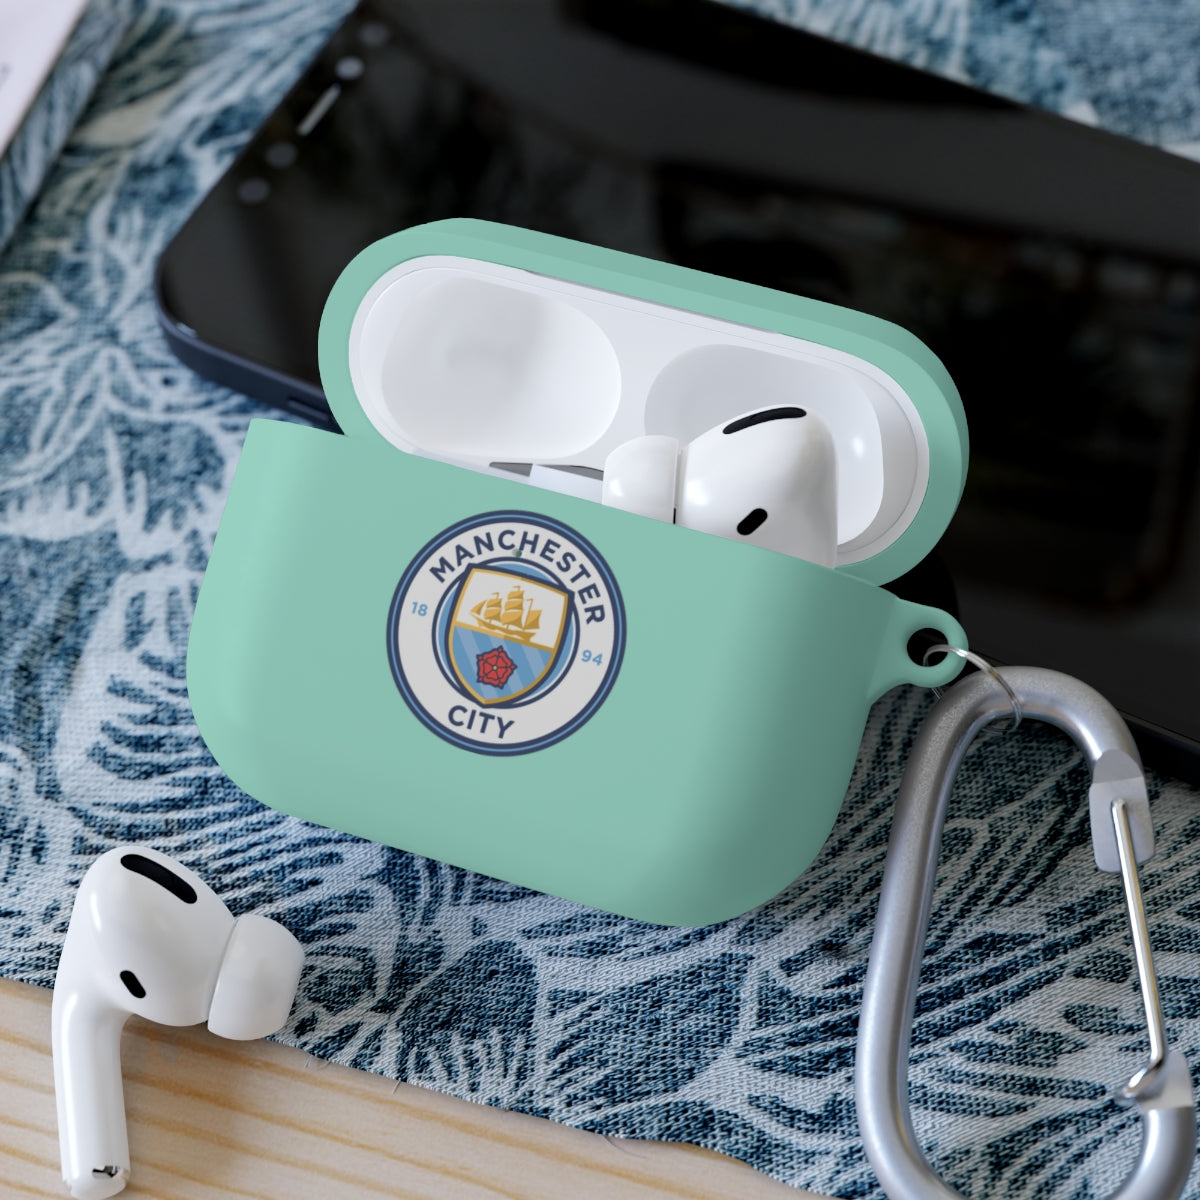 Manchester City AirPods and AirPods Pro Case Cover